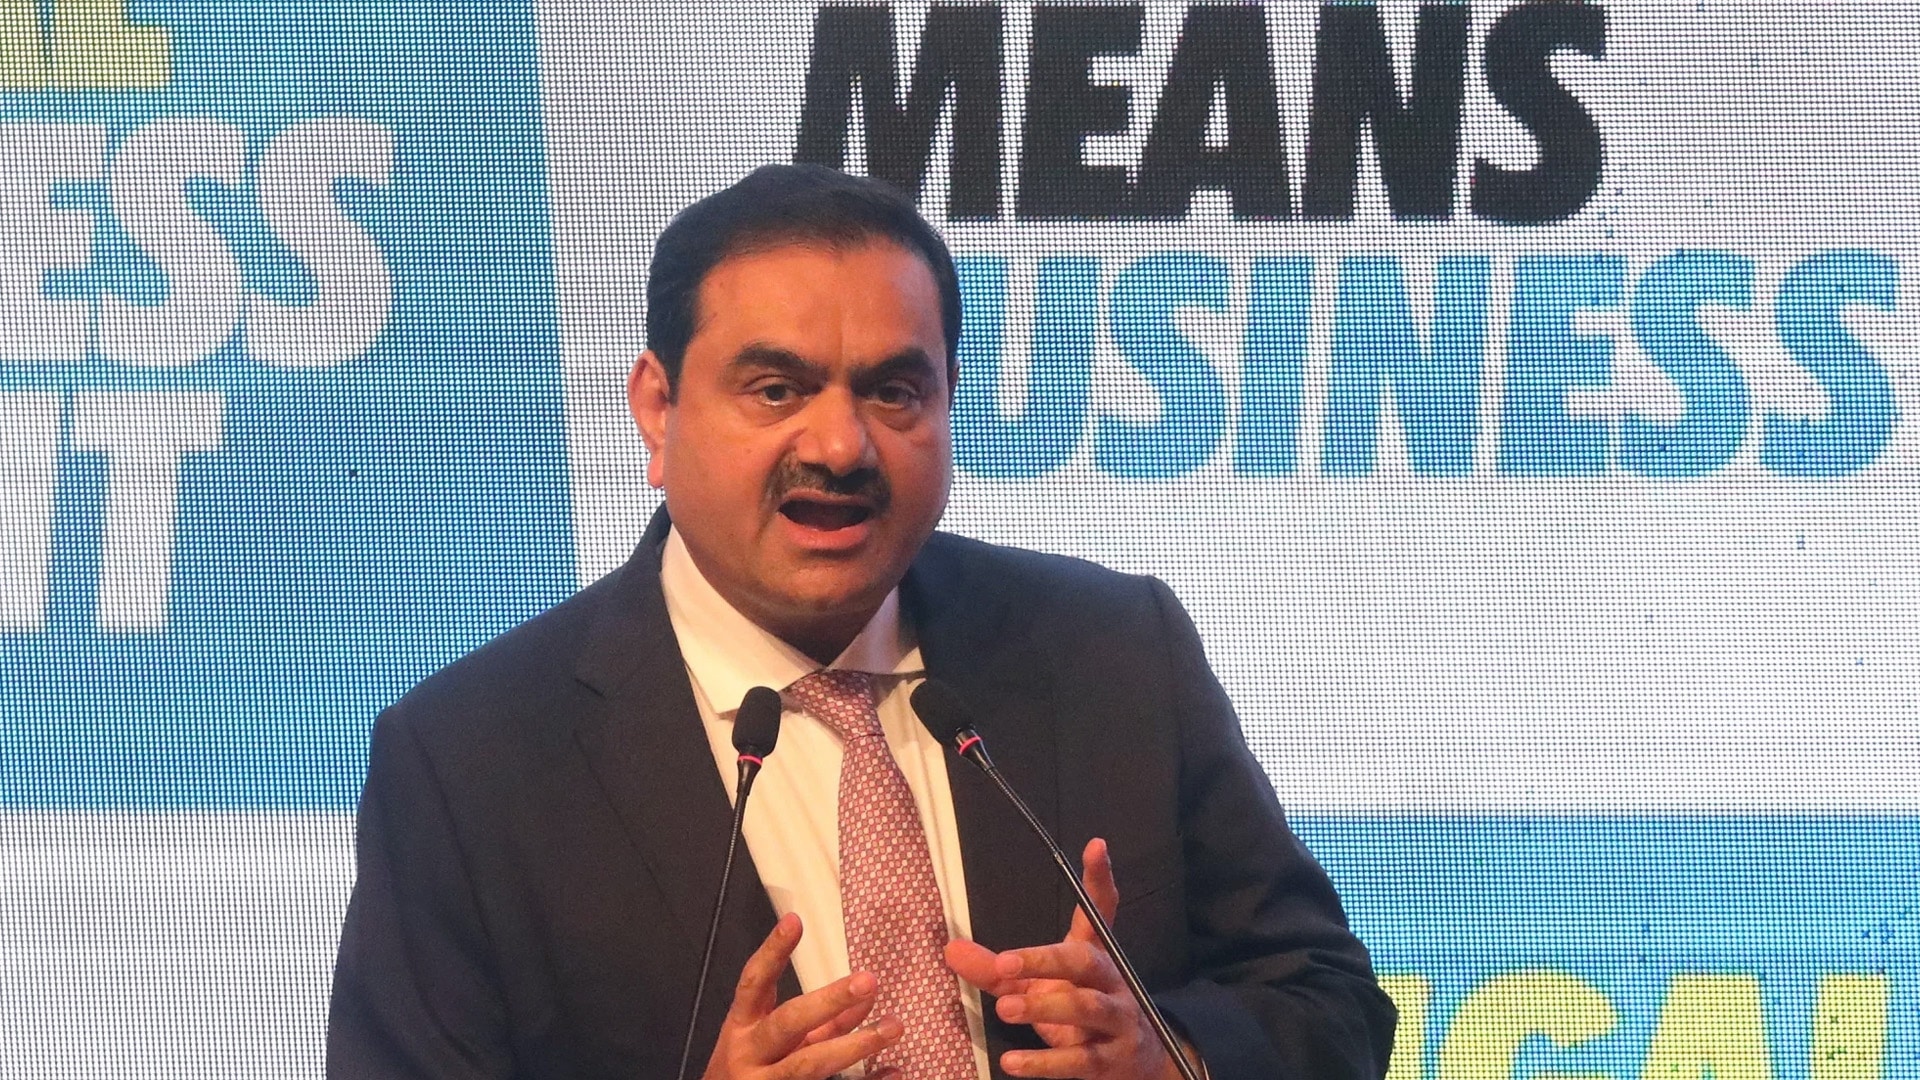 Hindenburg 2.0: OCCRP alleges Mauritius-based opaque funds invested millions of dollars in Adani stock